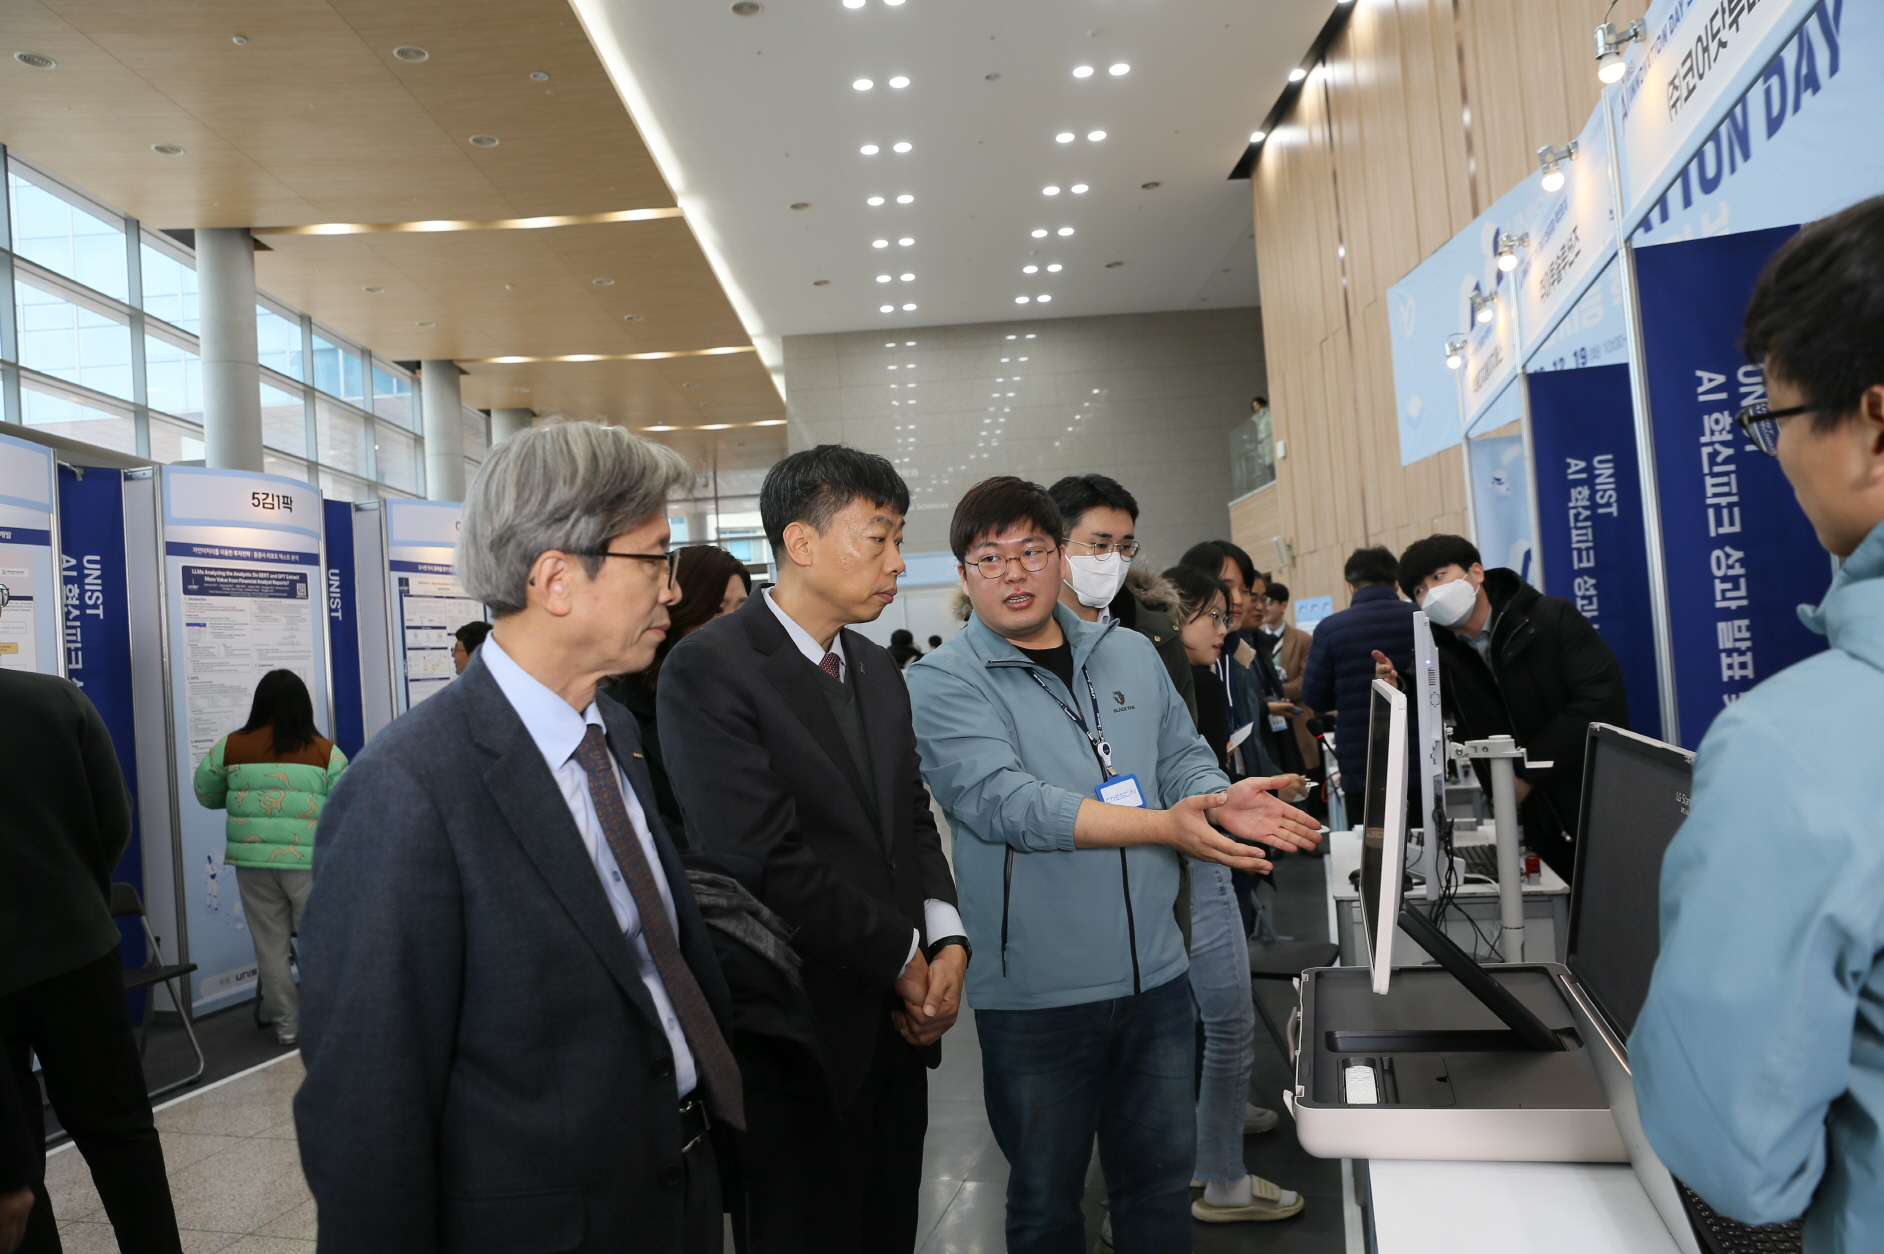 Vice President Jaiyong Lee and Director Chae Kwon Lee at the exhibit, highlighting major accomplishments of AI Innovation Park.